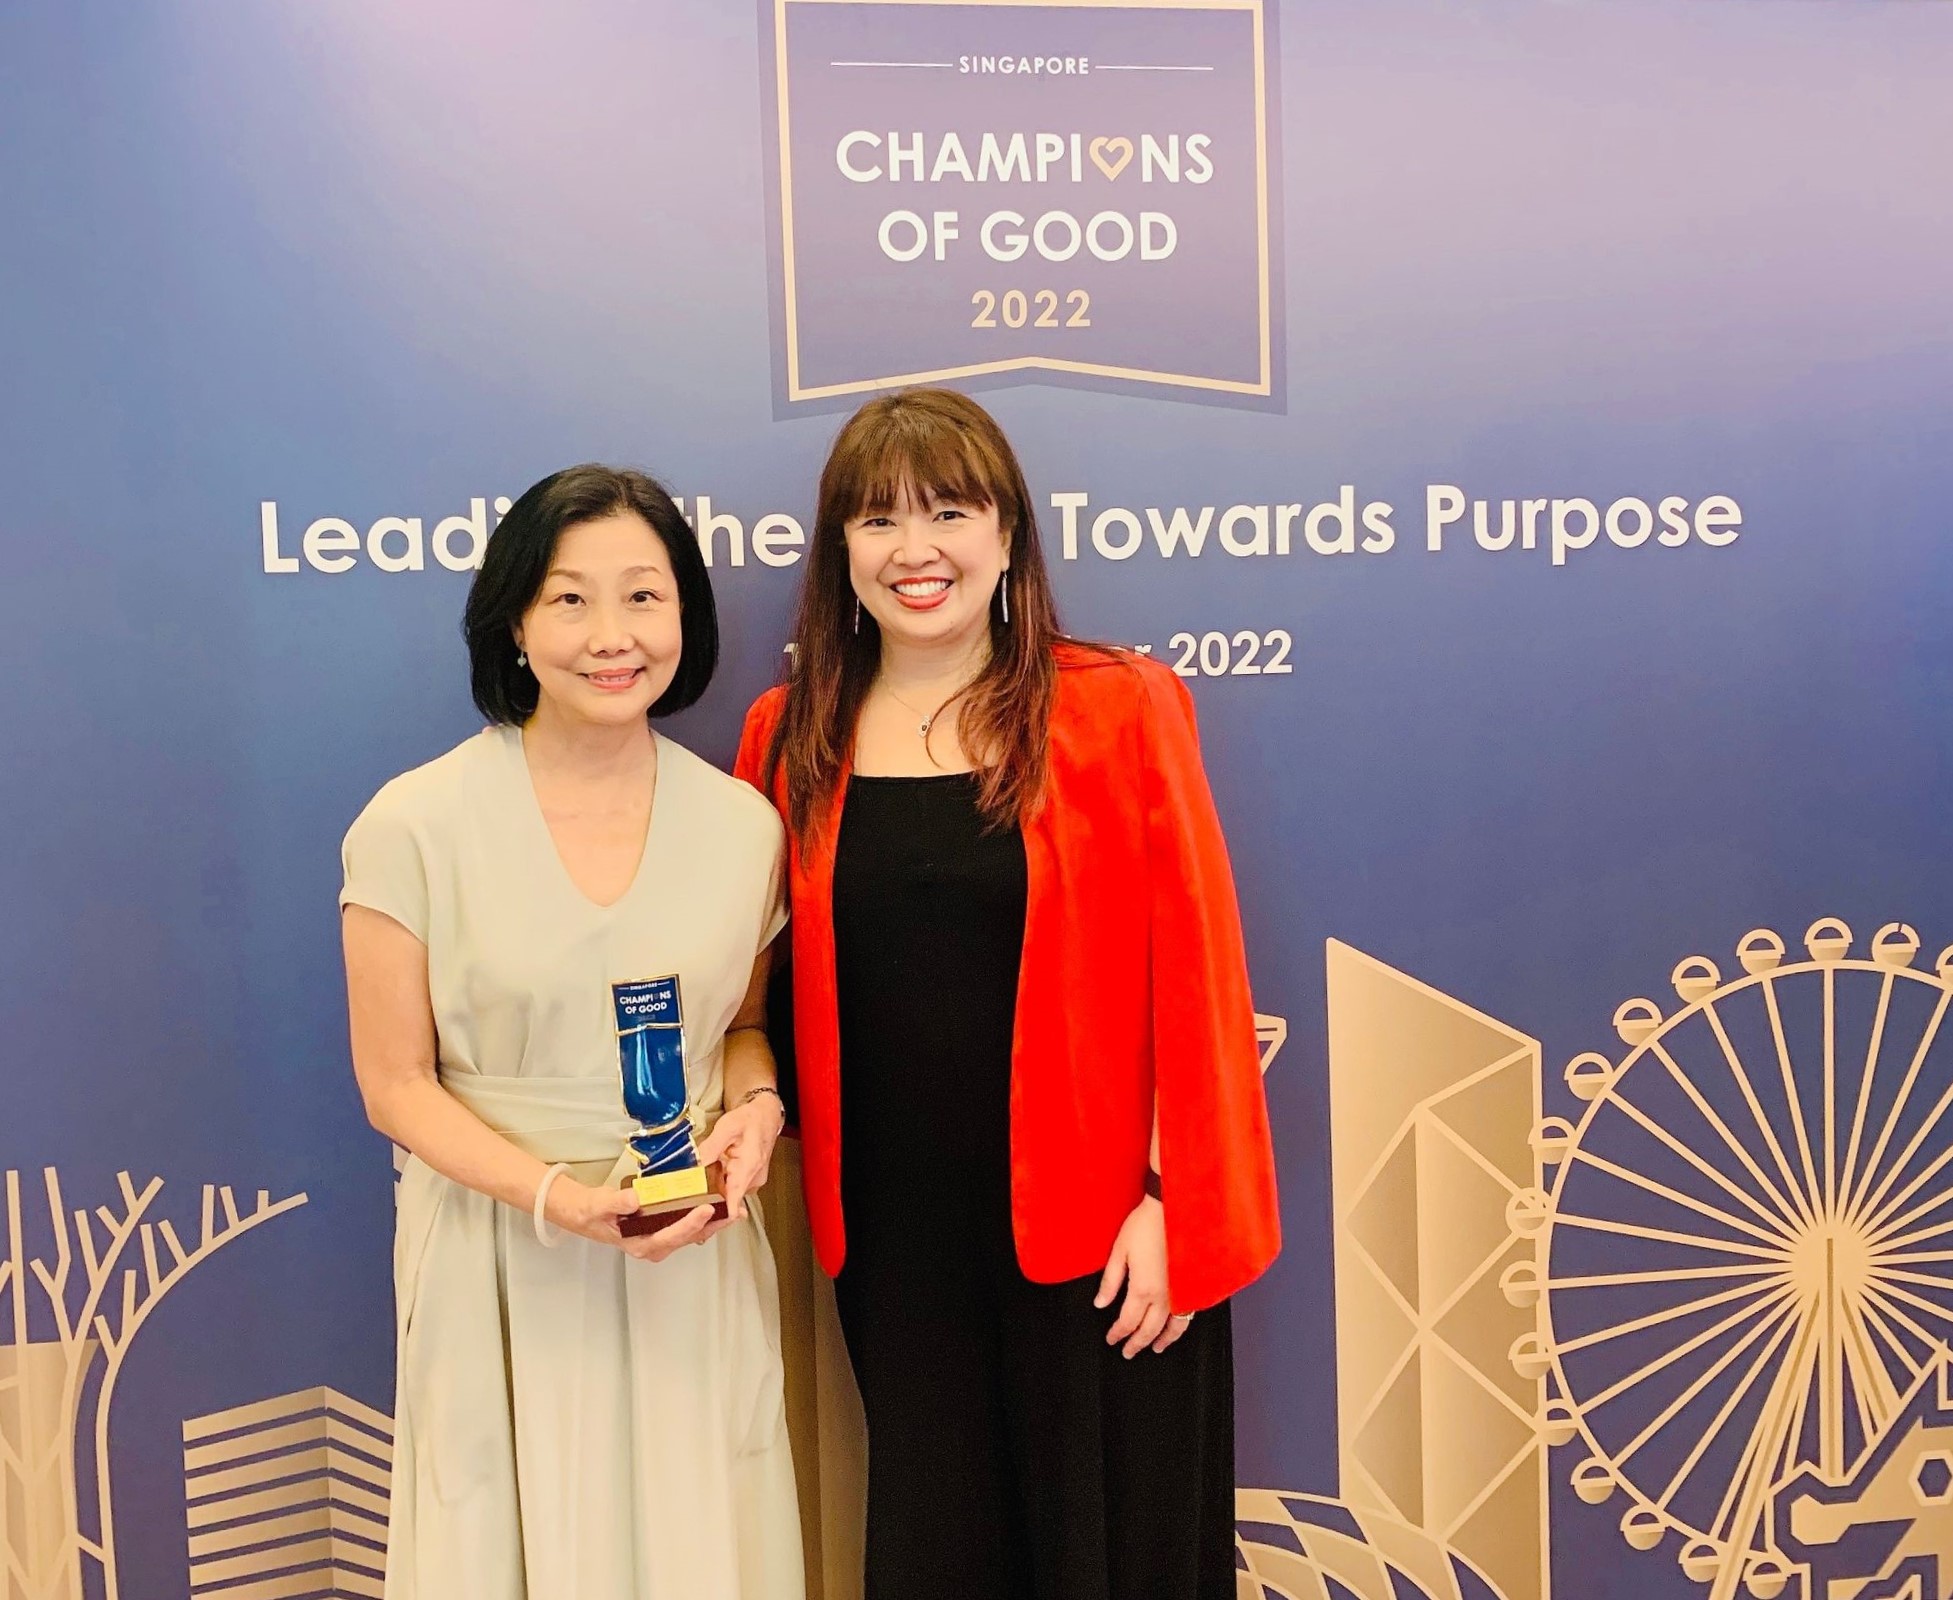 From left to right: Soon Su Lin, CEO, Frasers Property Singapore and Adeline Ong, SVP, Head of Group Strategic Communications & Branding, Frasers Property Limited